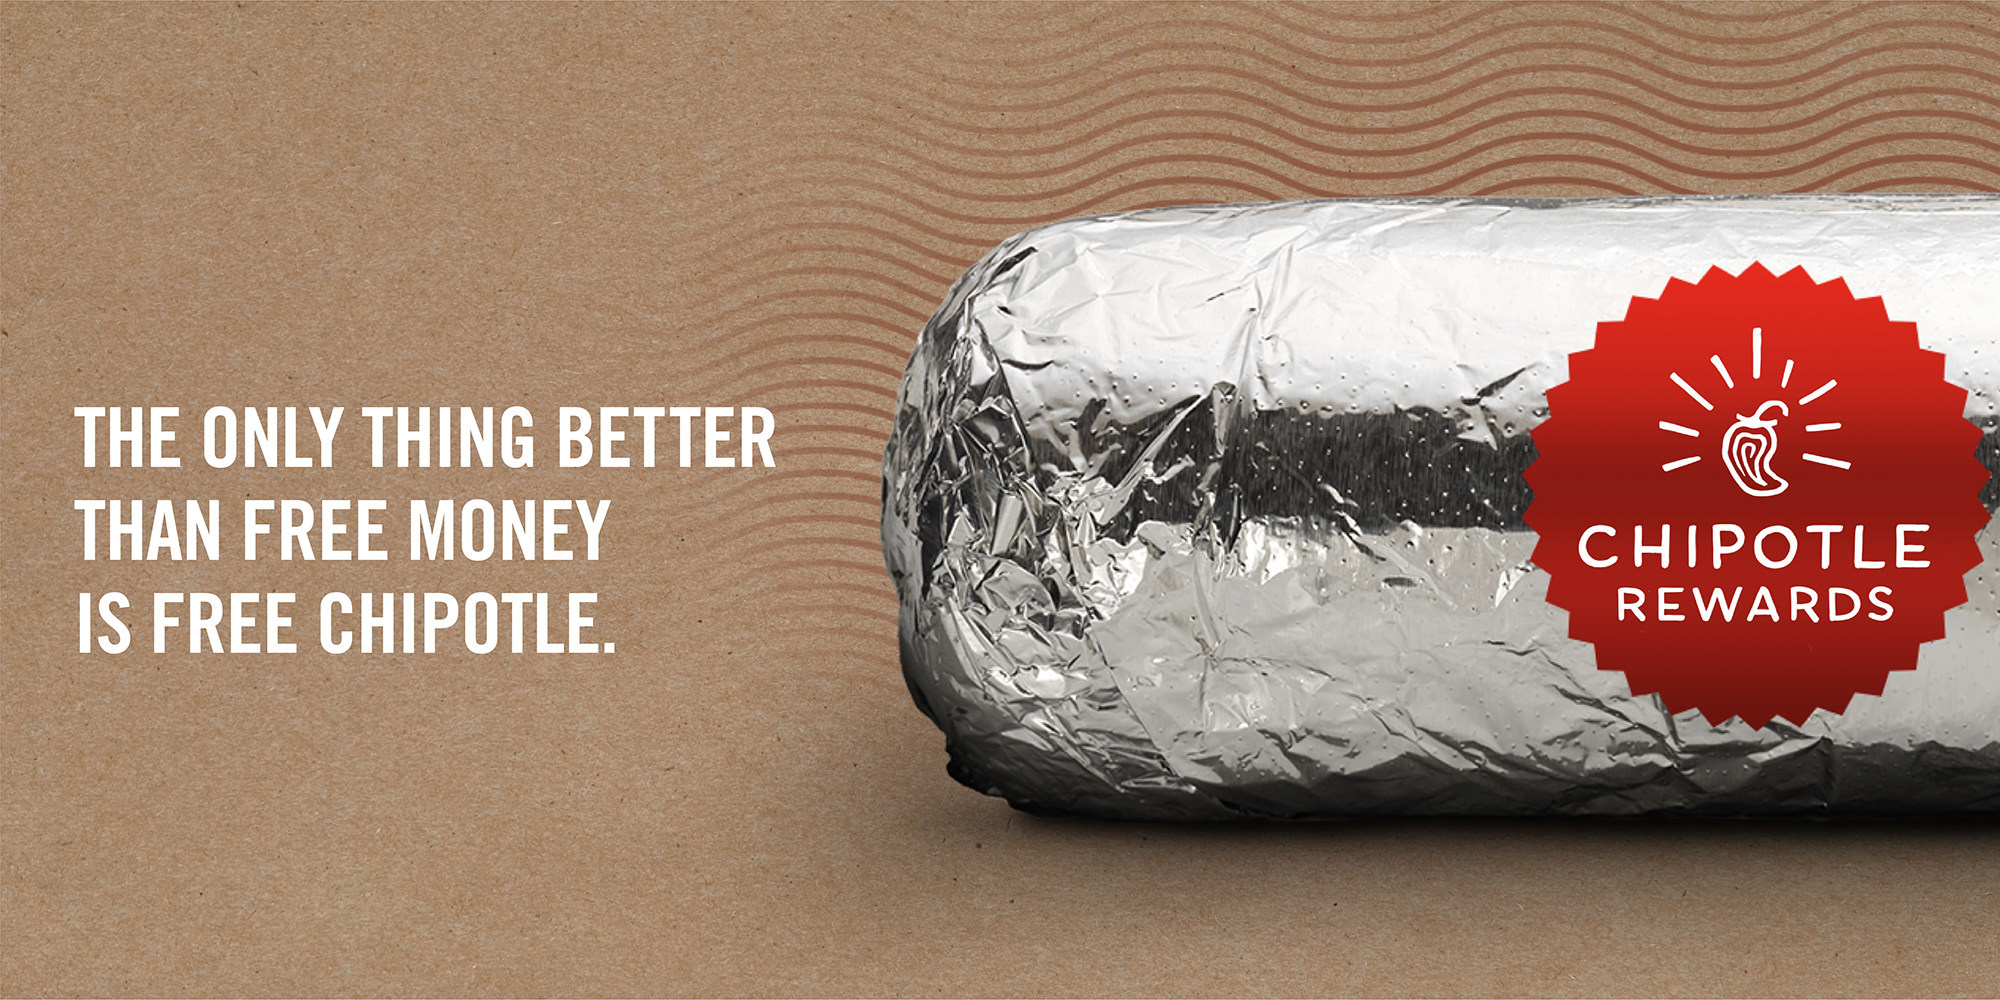 Chipotle Rewards Launches By Giving Fans A Quarter Of A Million